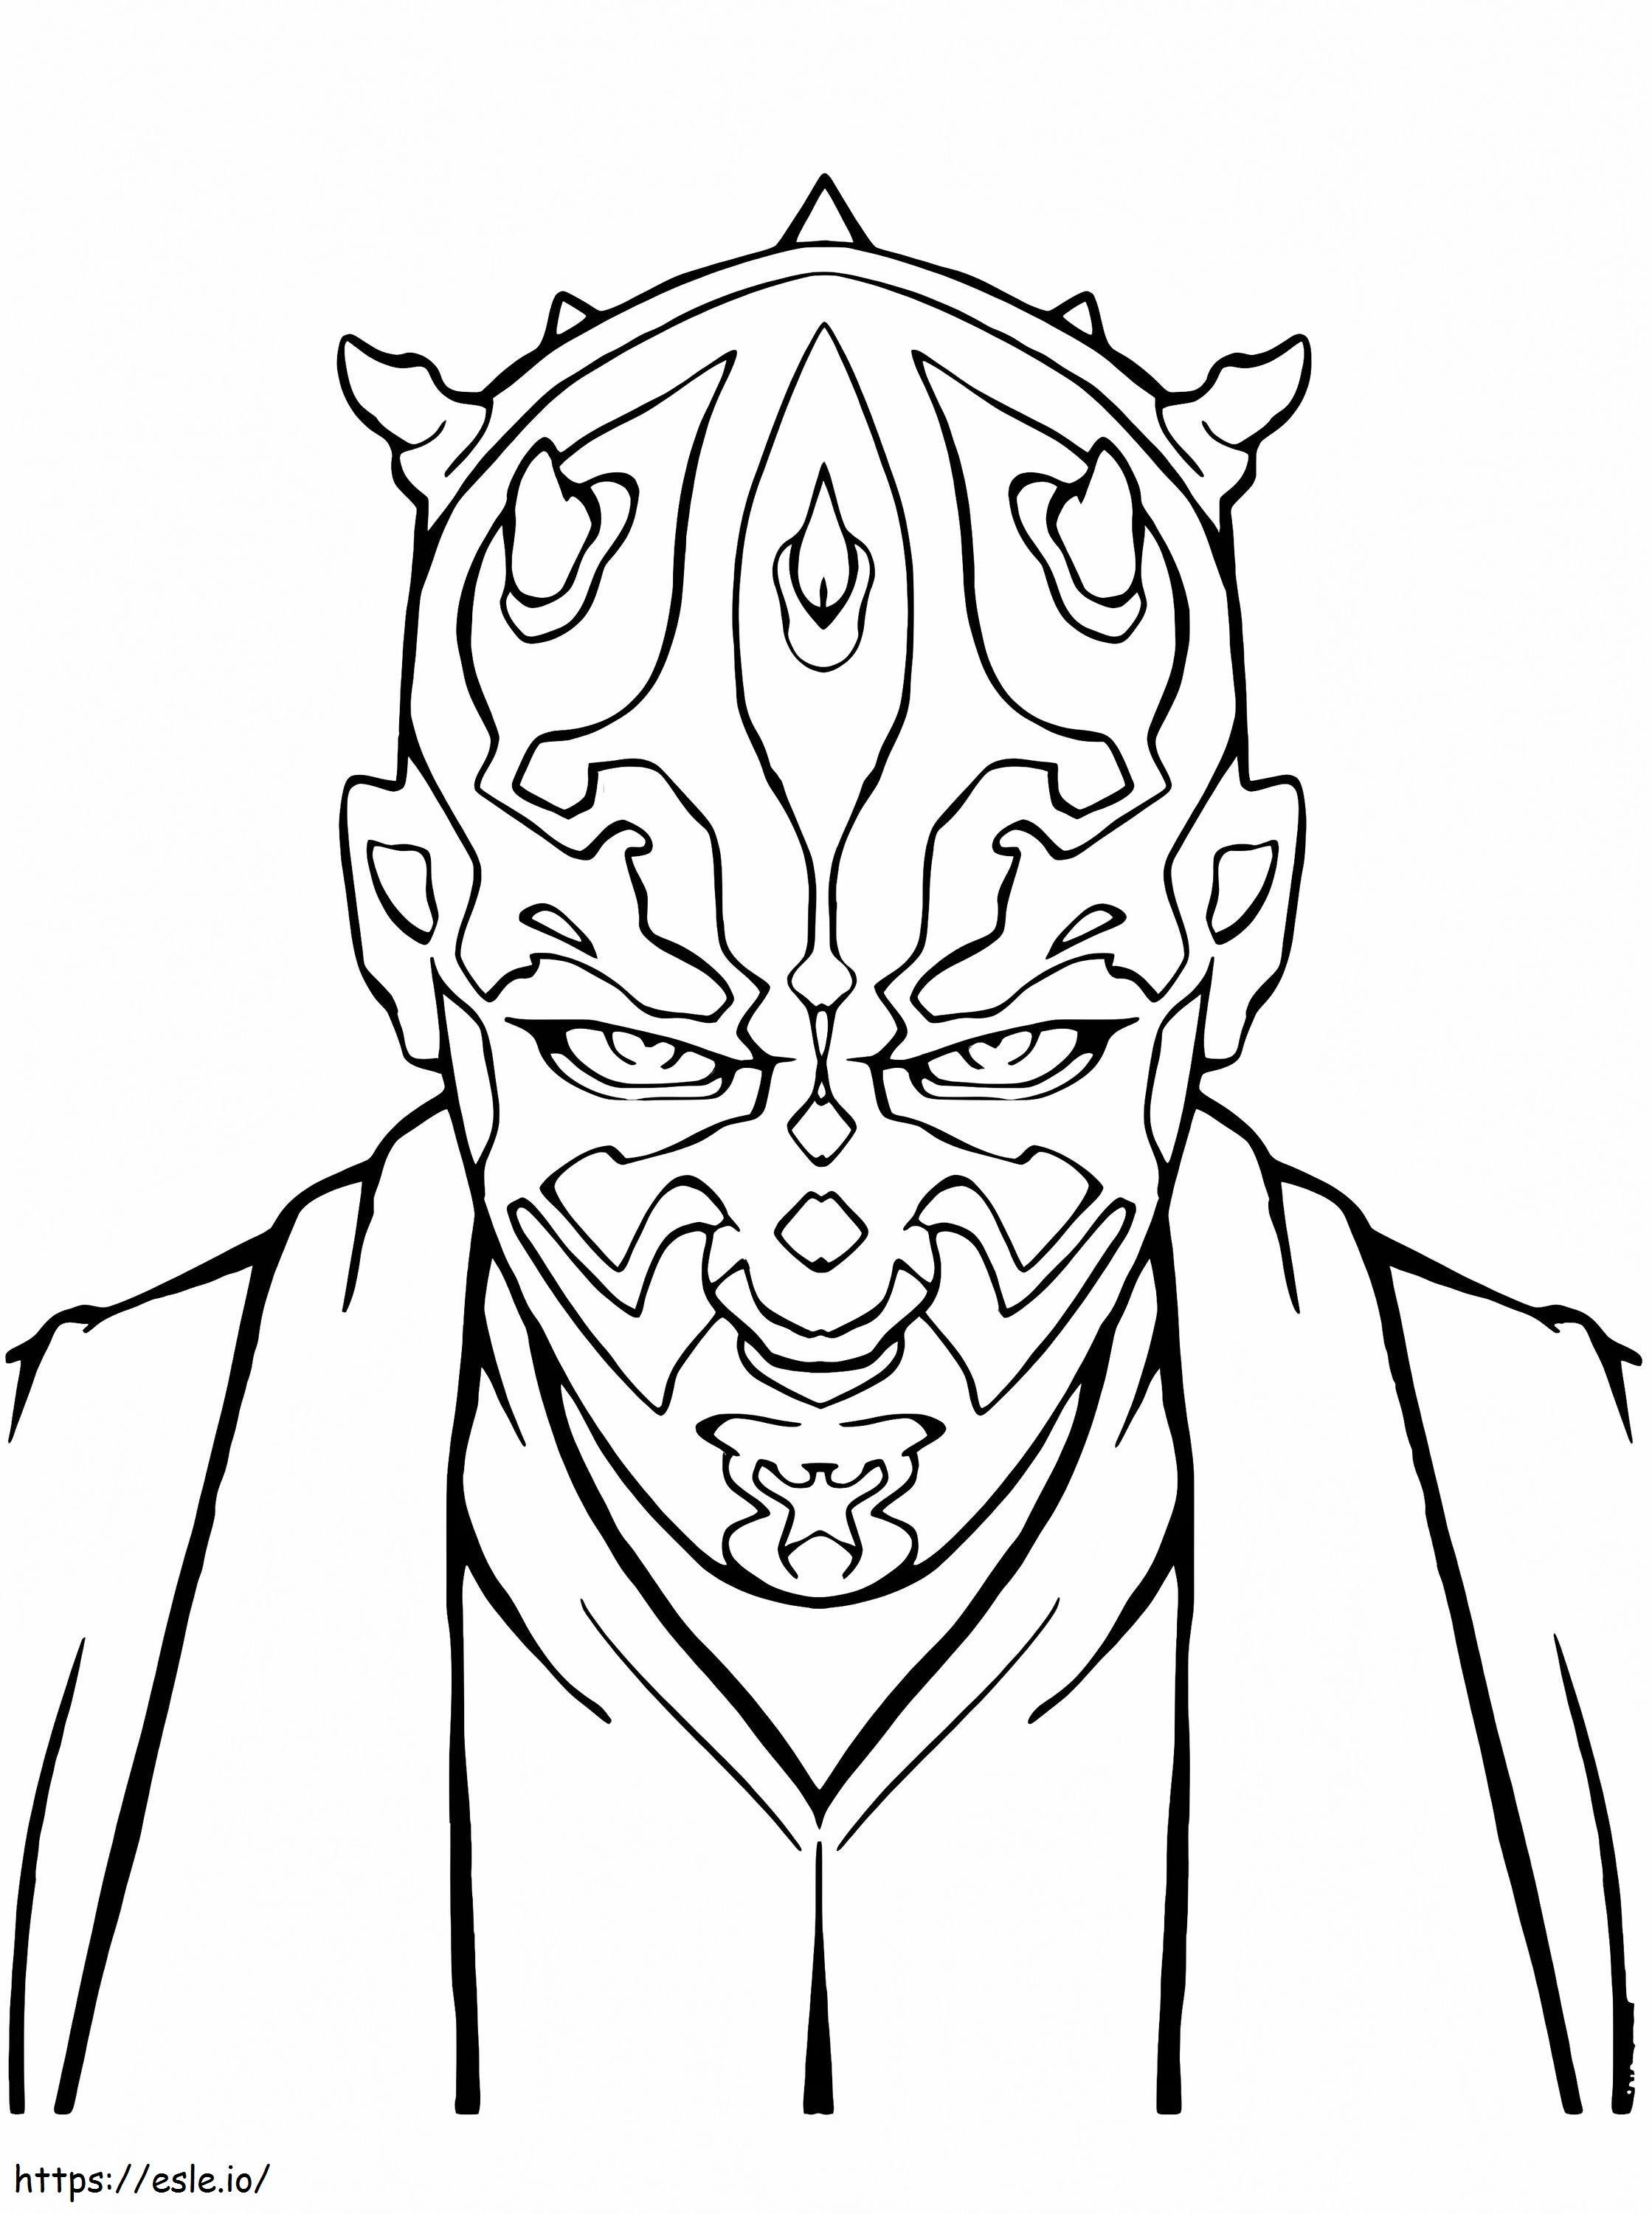 Angry Darth Maul coloring page